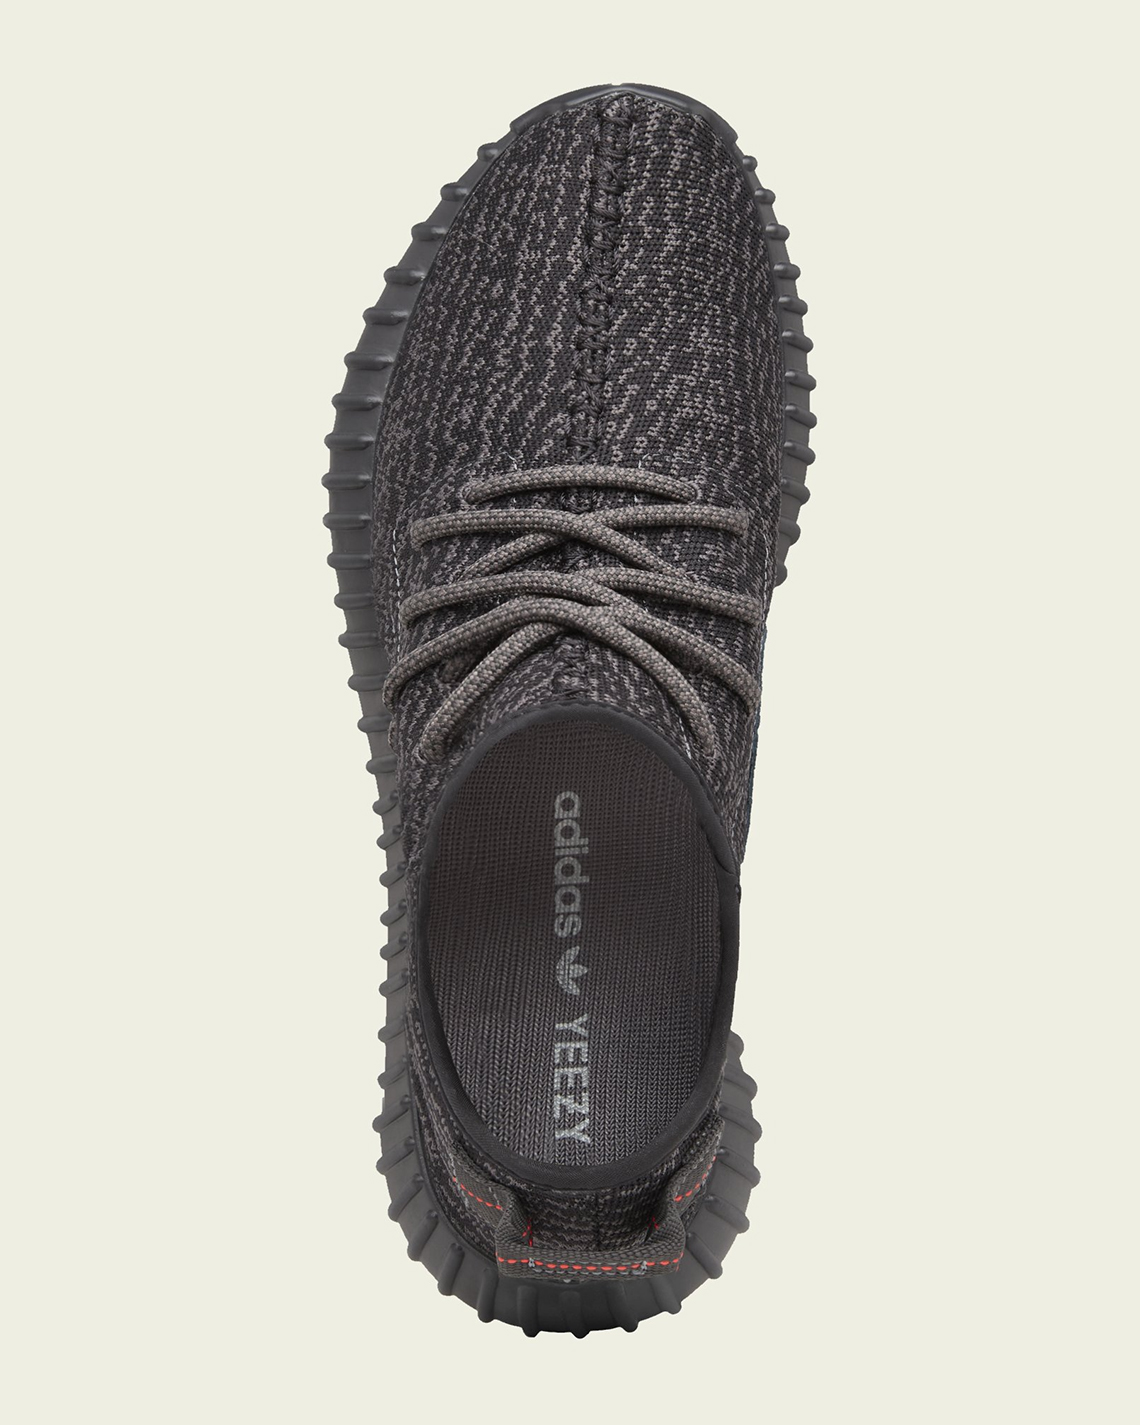 Adidas Yeezy Boost 350 Pirate Black 2023 Release Date 2